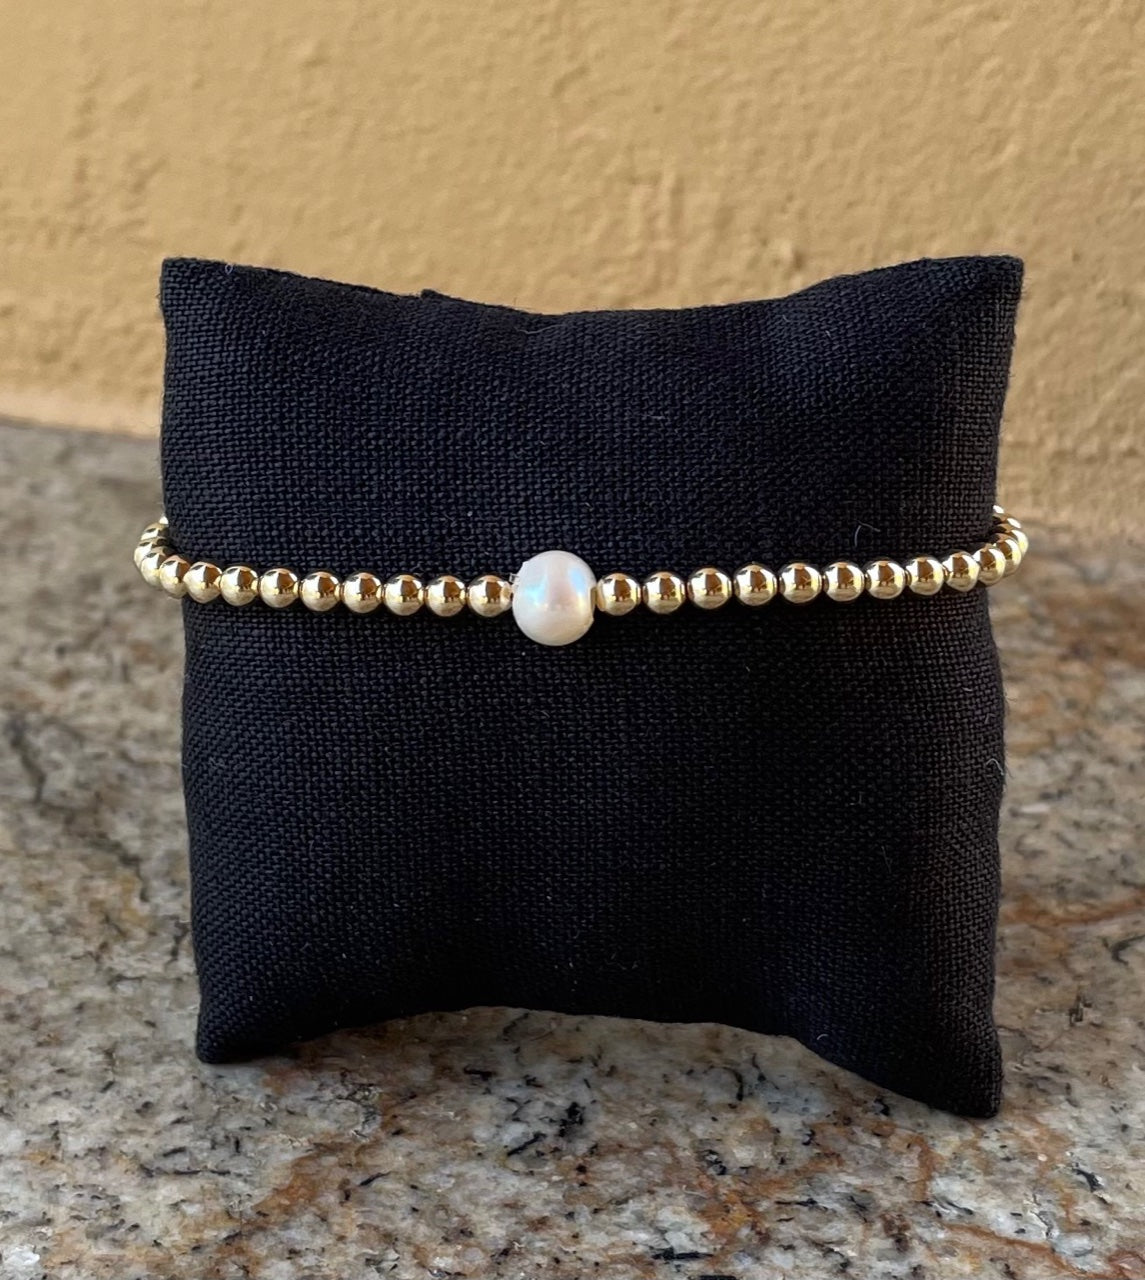 Bracelet - 14K gold filled beaded stretch bracelet with a white freshwater pearl